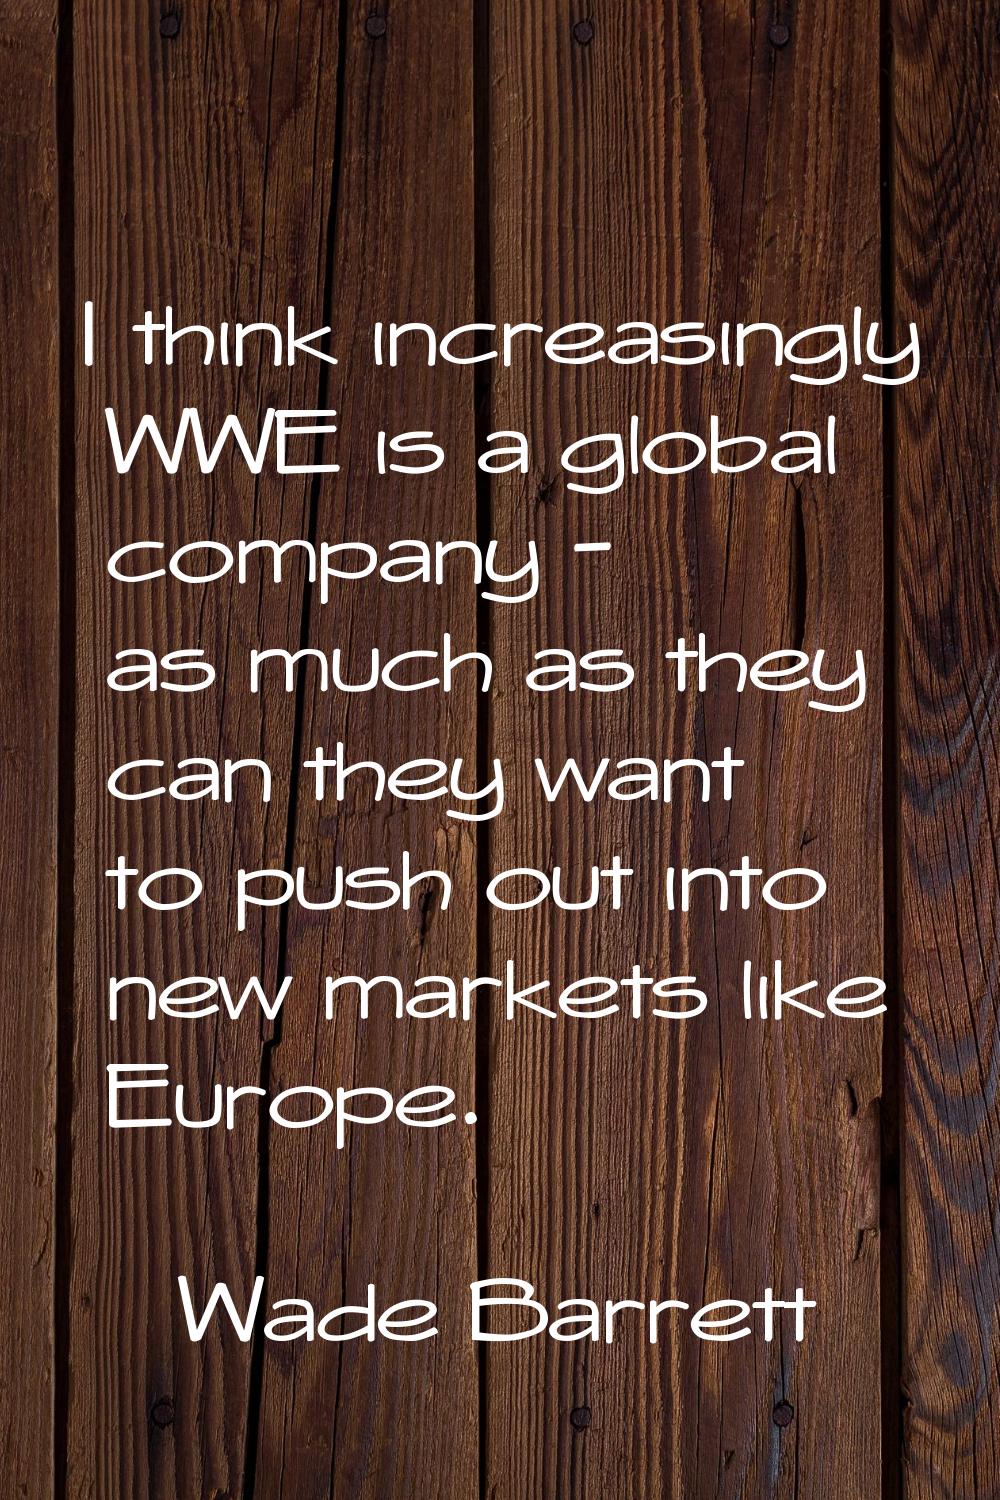 I think increasingly WWE is a global company - as much as they can they want to push out into new m